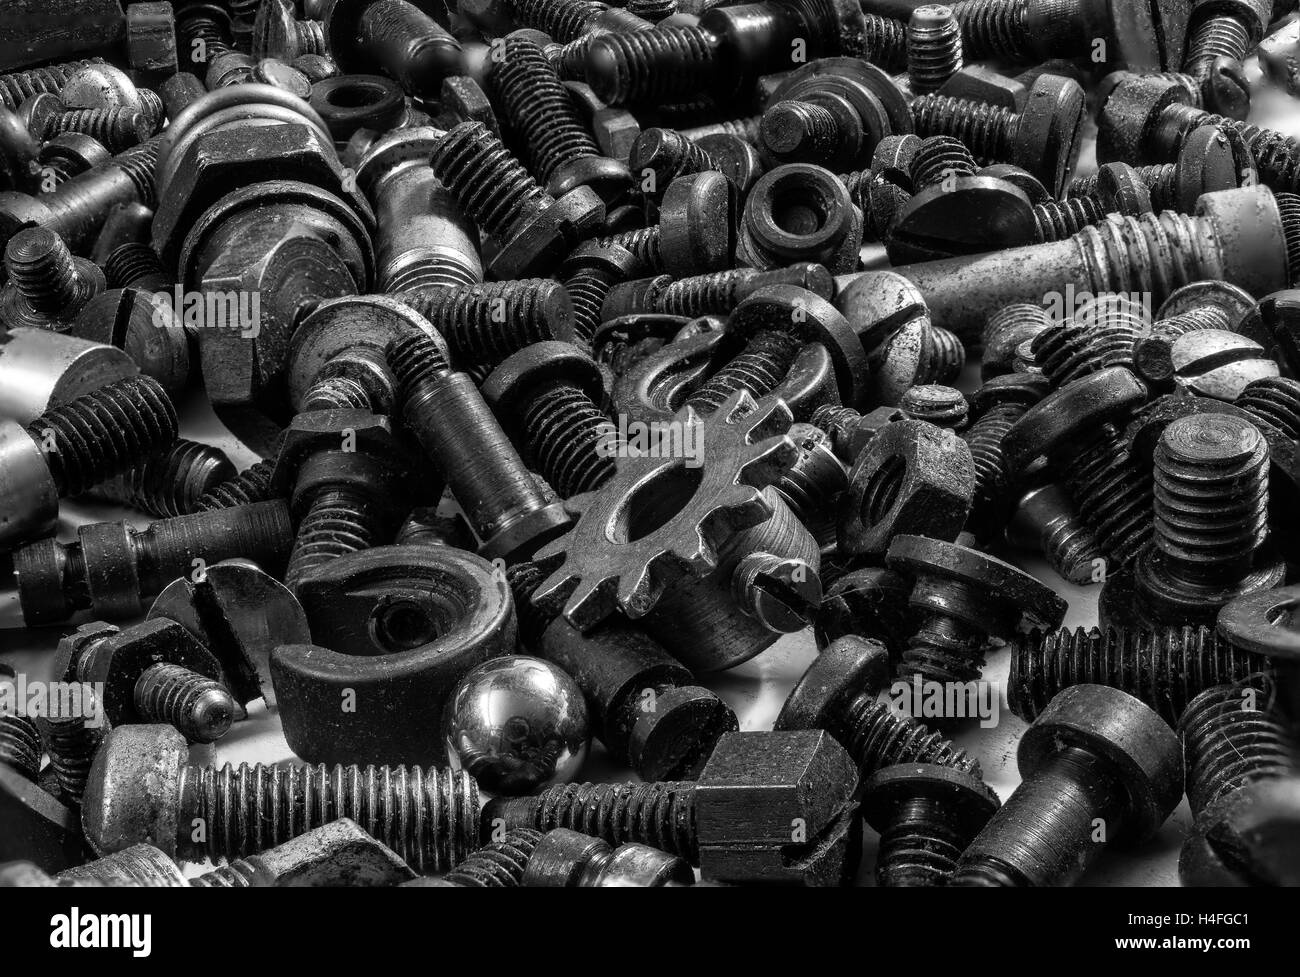 Nuts and Bolts Stock Photo